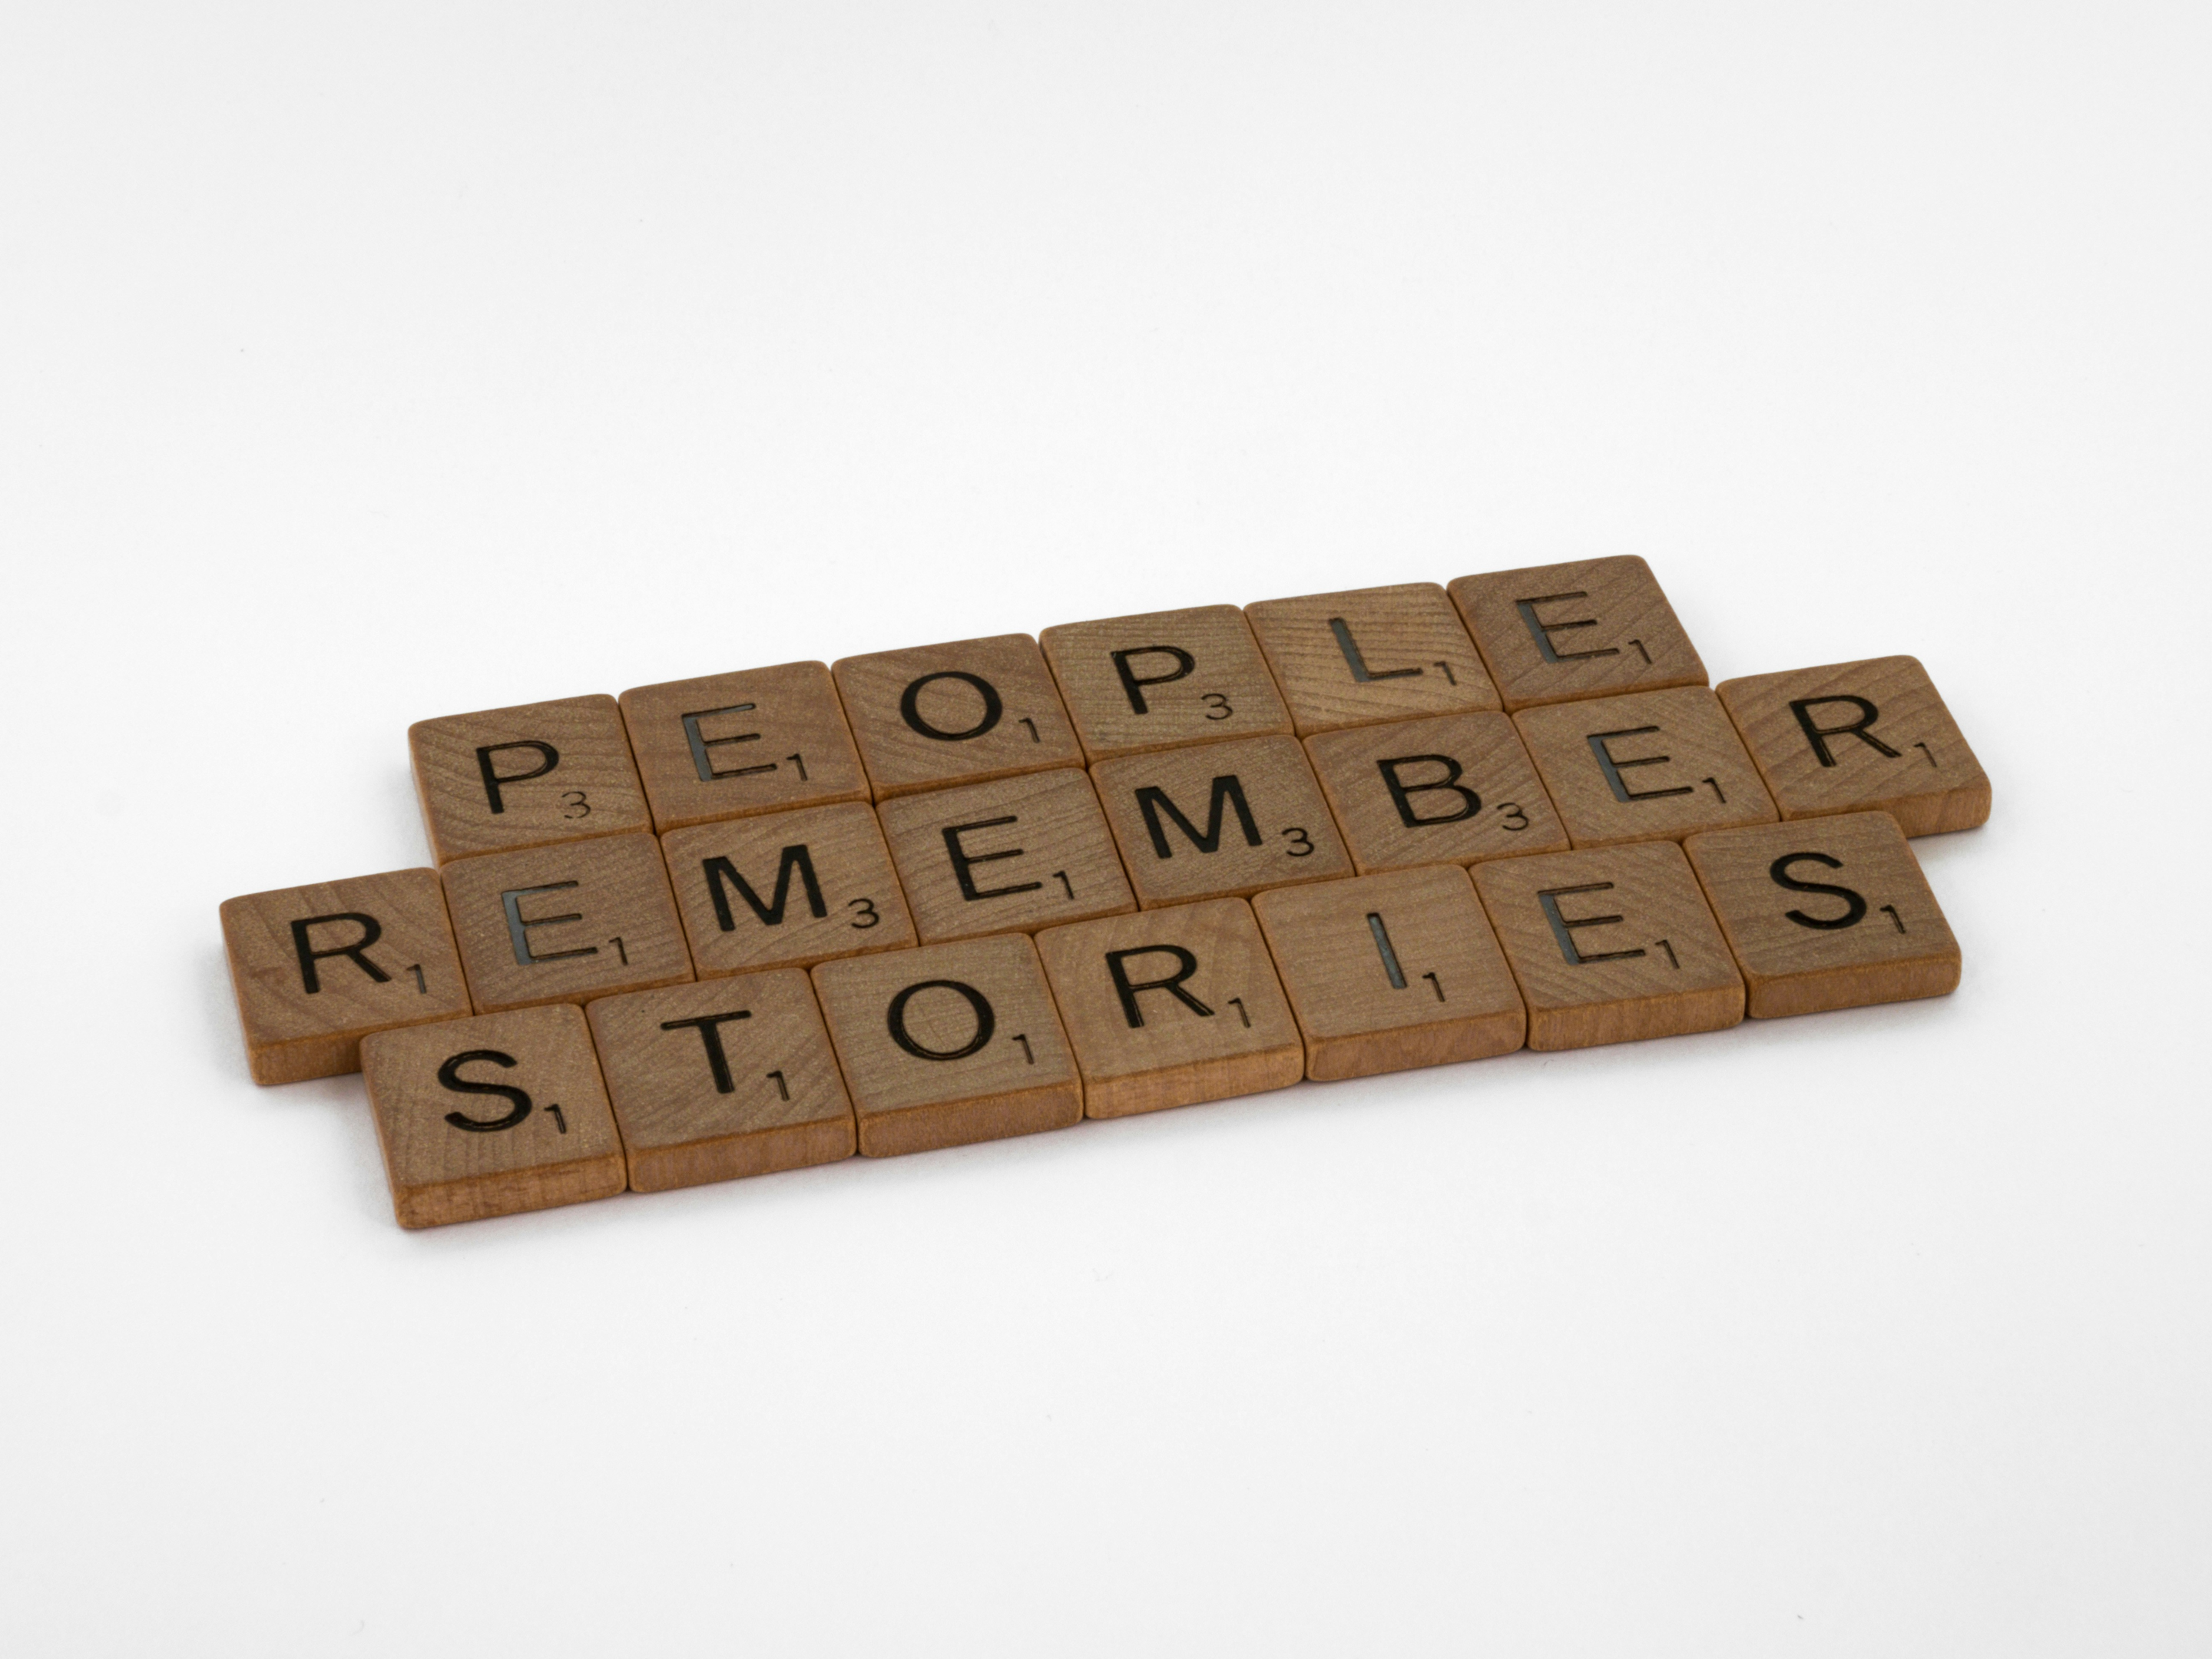 People remember stories written with Srabble letters